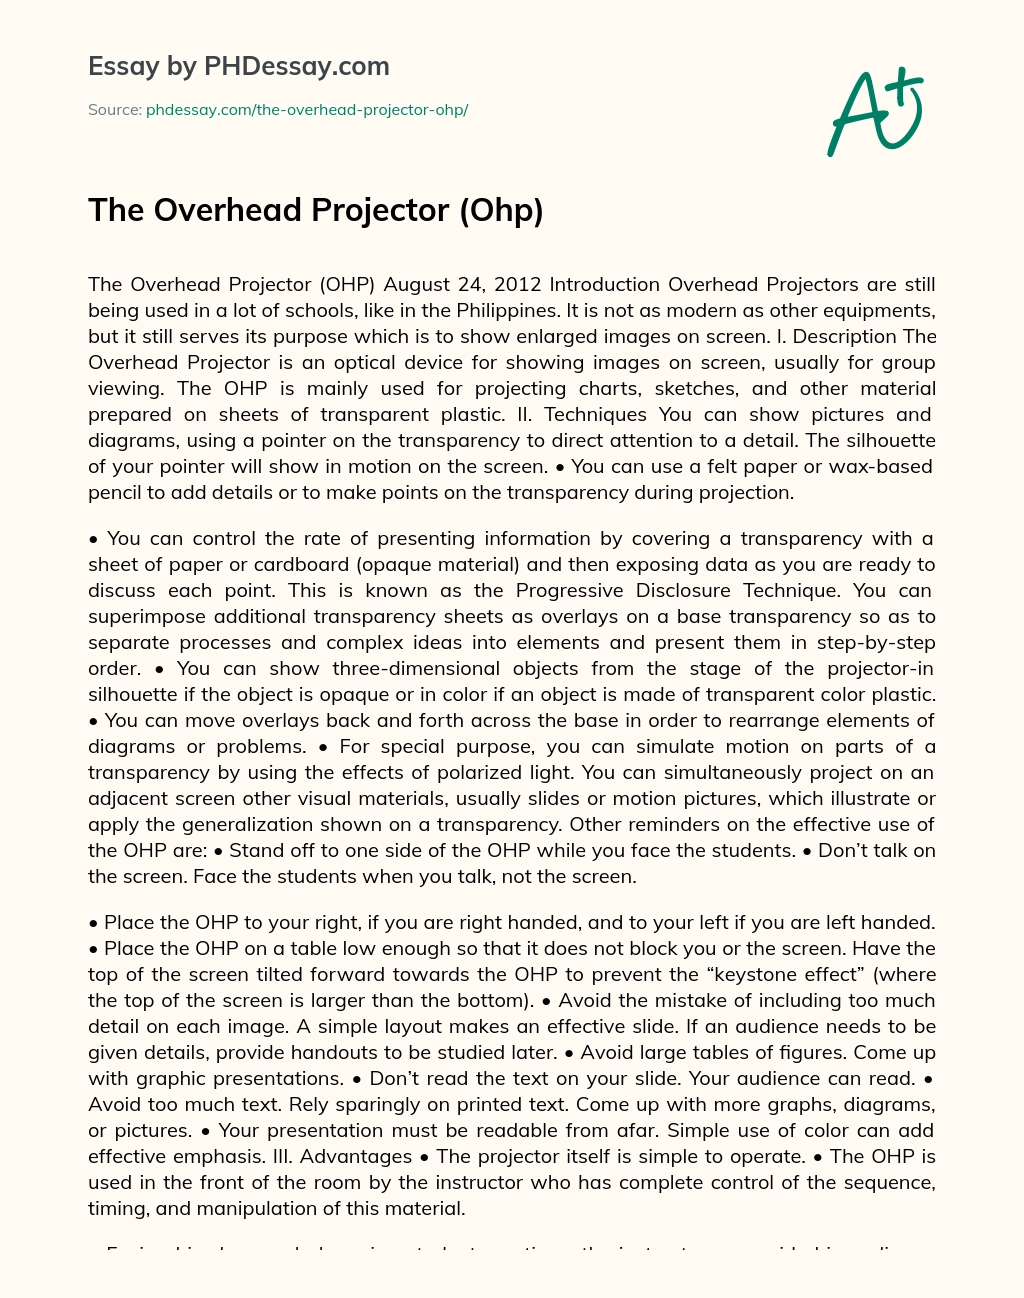 The Overhead Projector (Ohp) essay